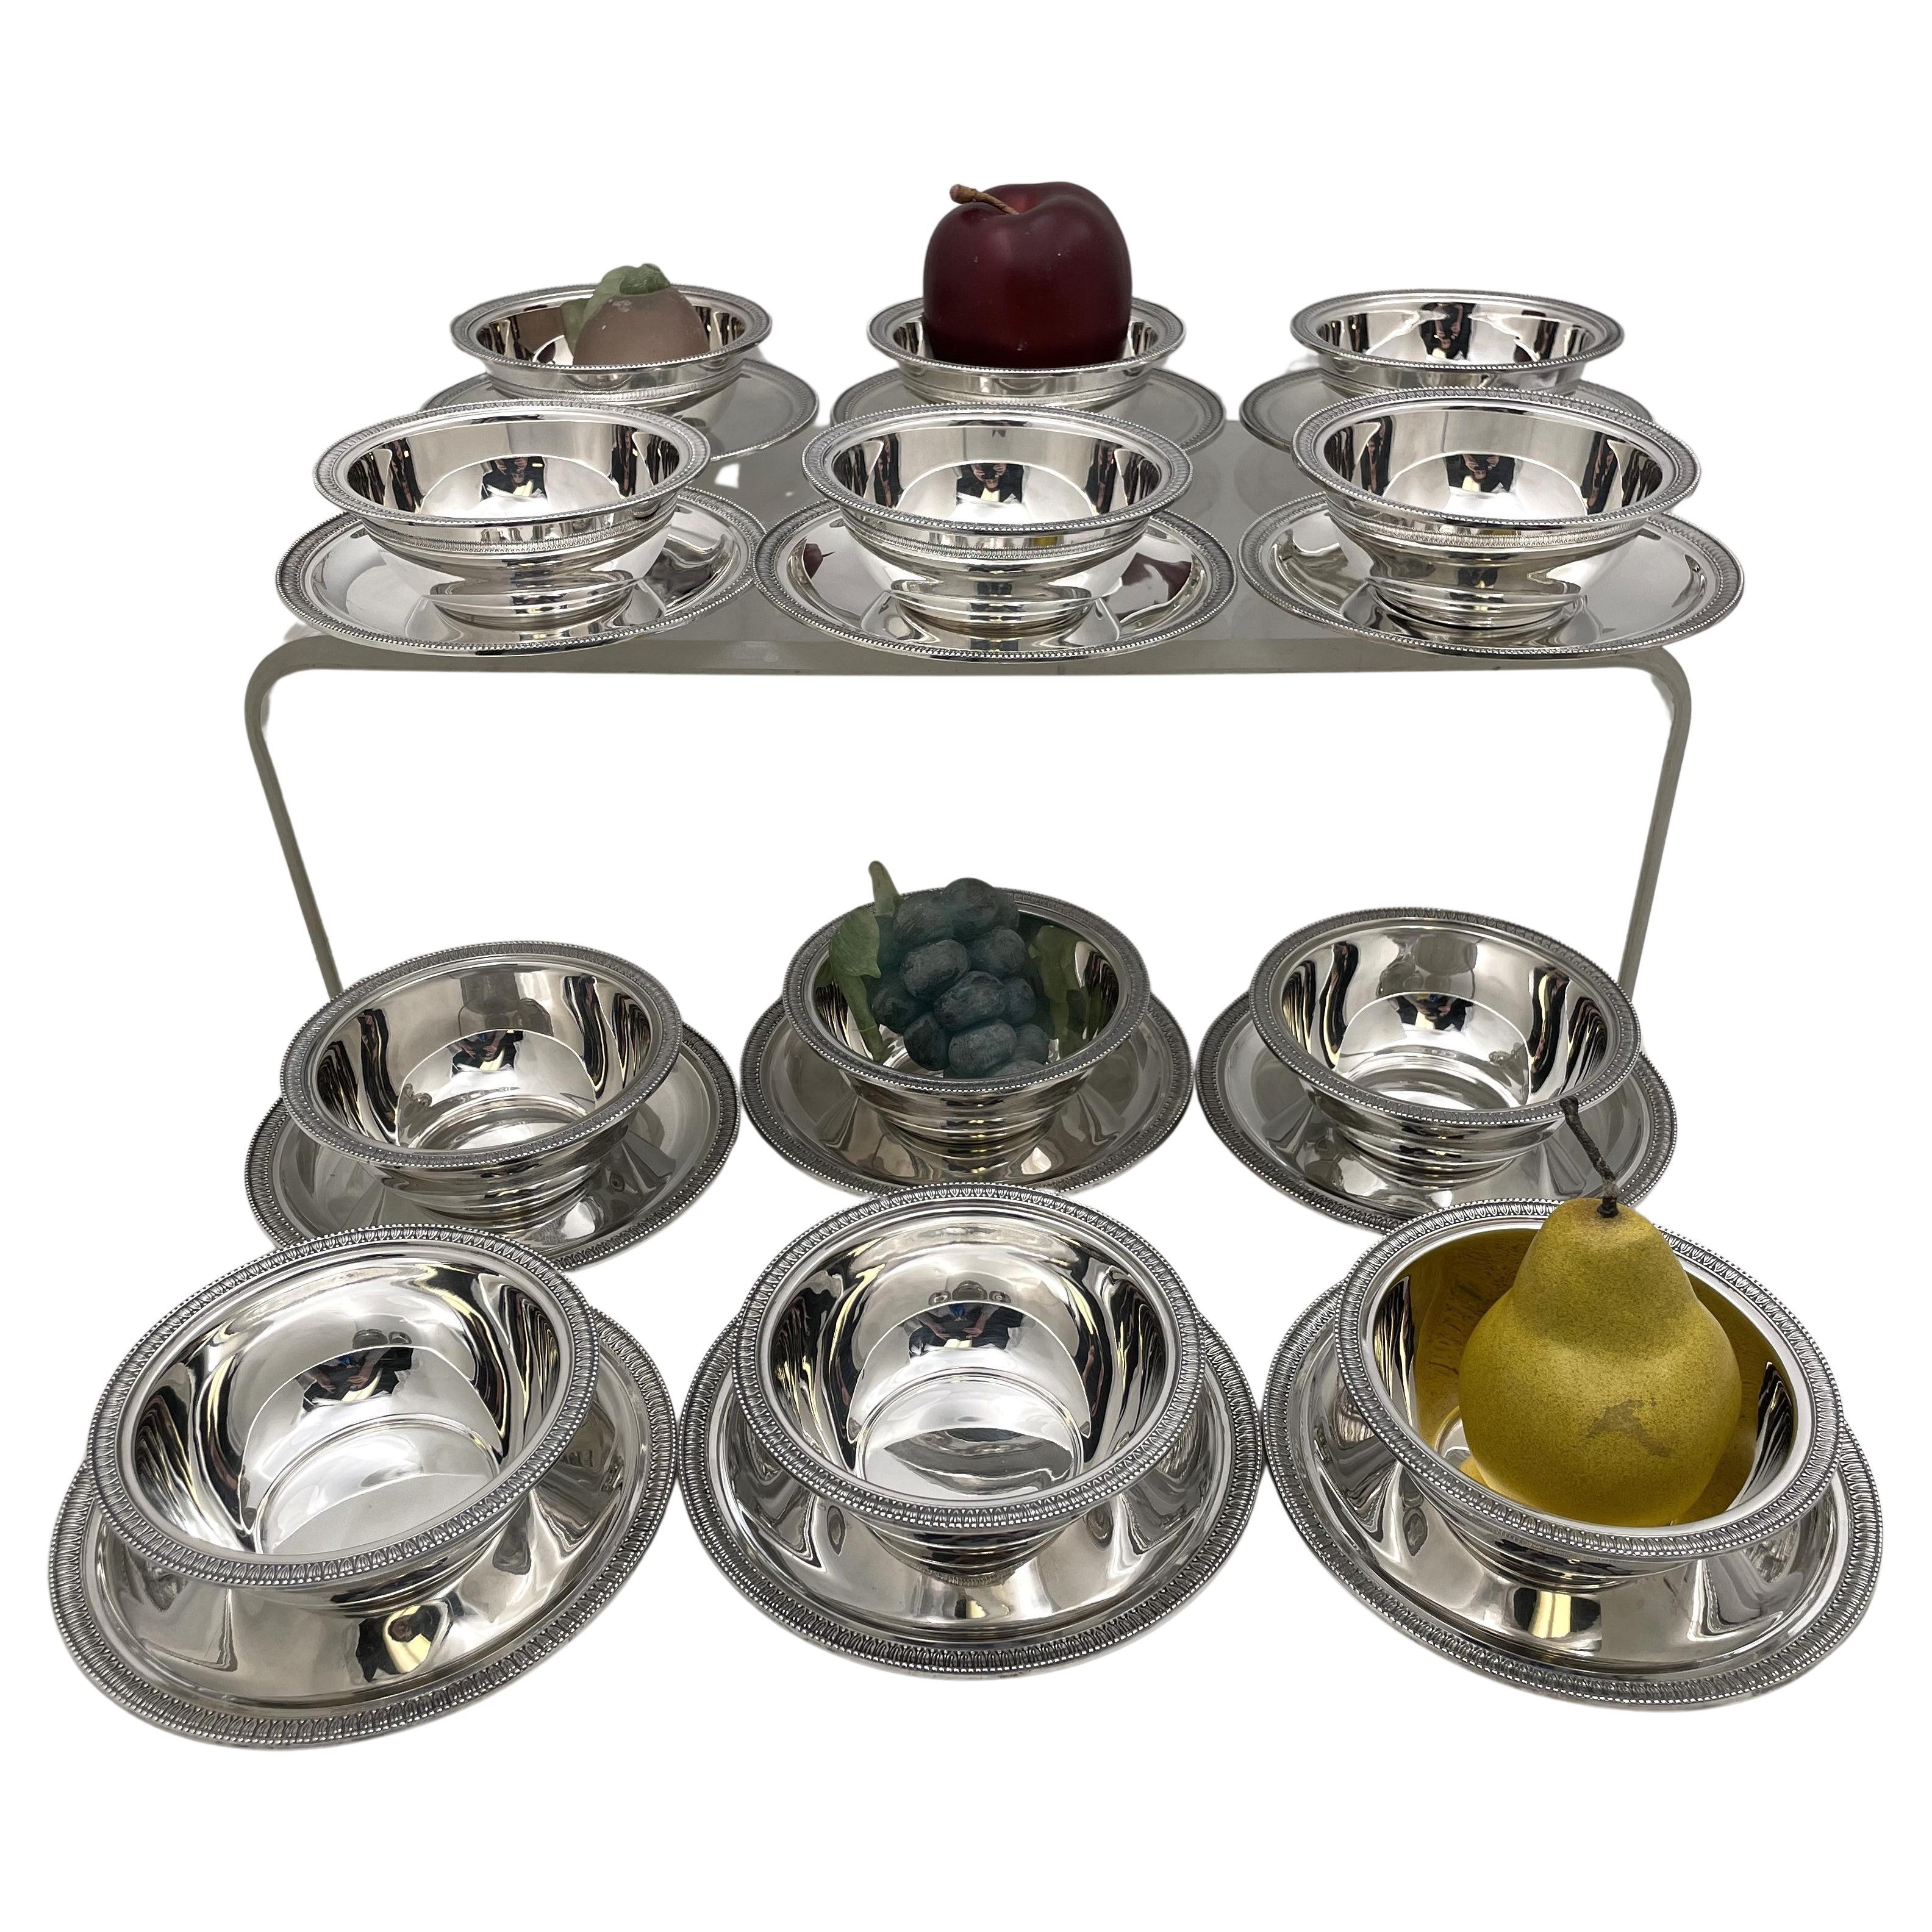 Ricci Italian Silver Set of 24 Dessert Compote Bowls & Underplates For Sale